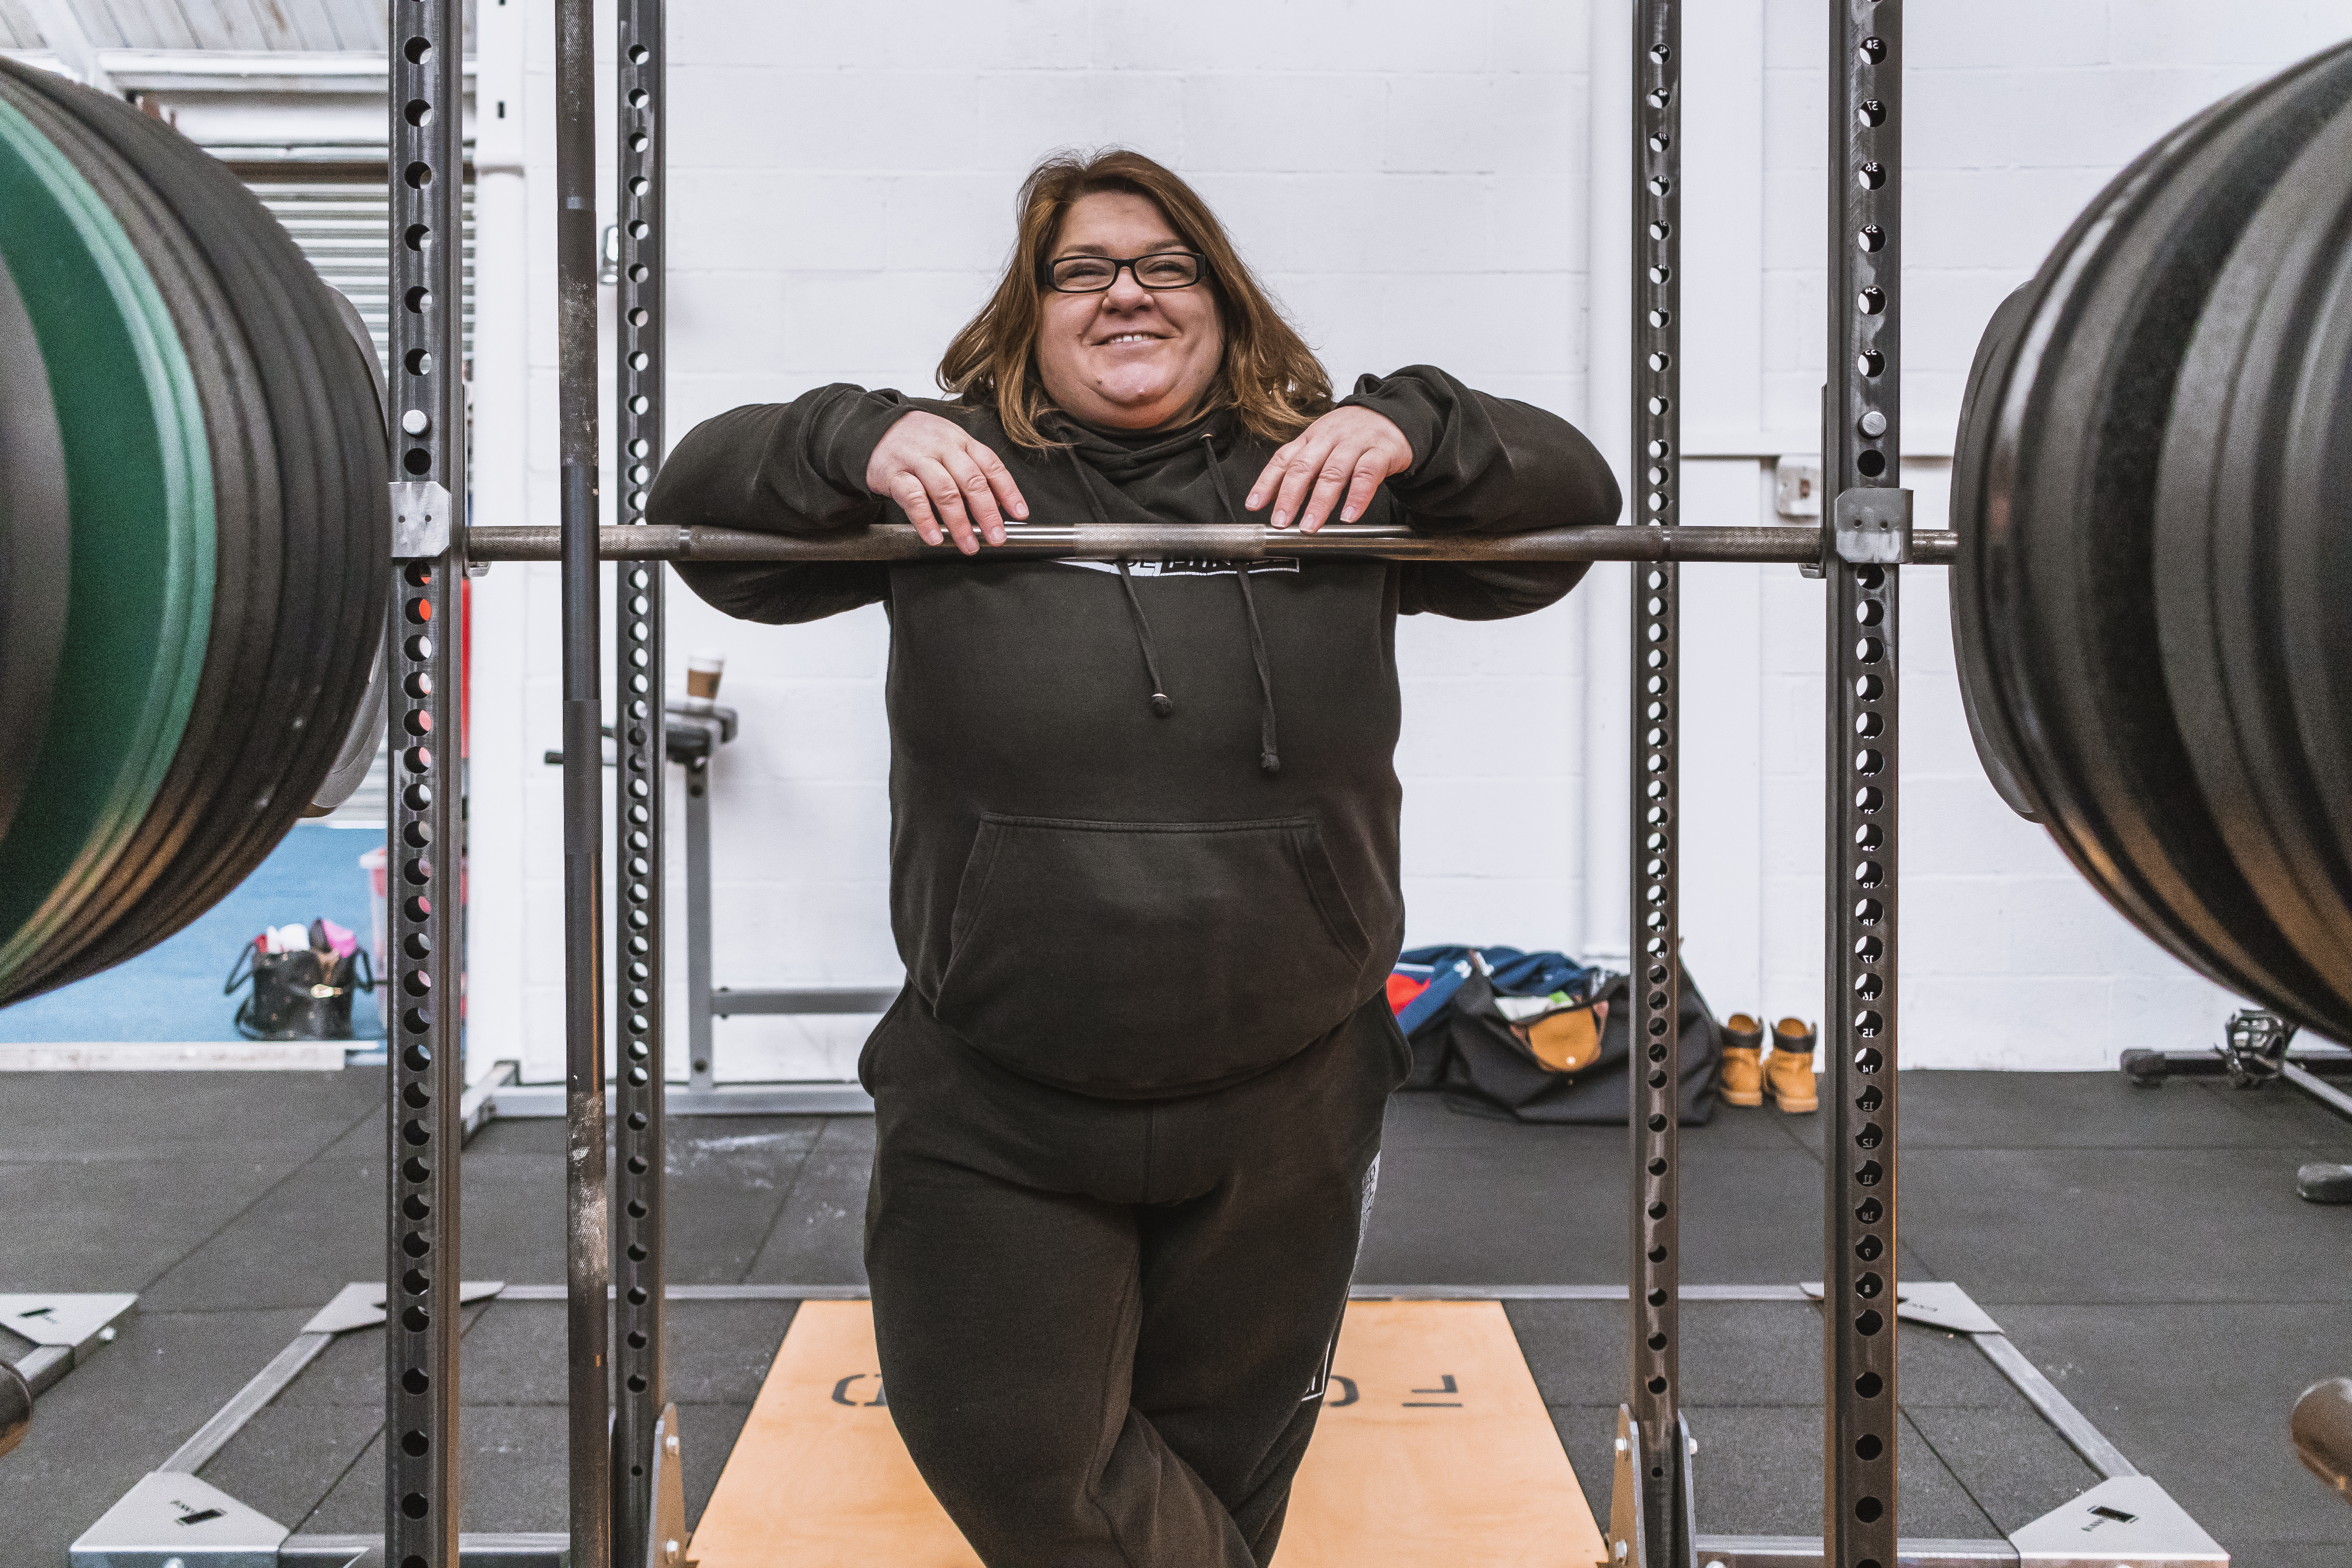 Image of female in black hoodie smiling and resting her arms on a squat bar in a gym